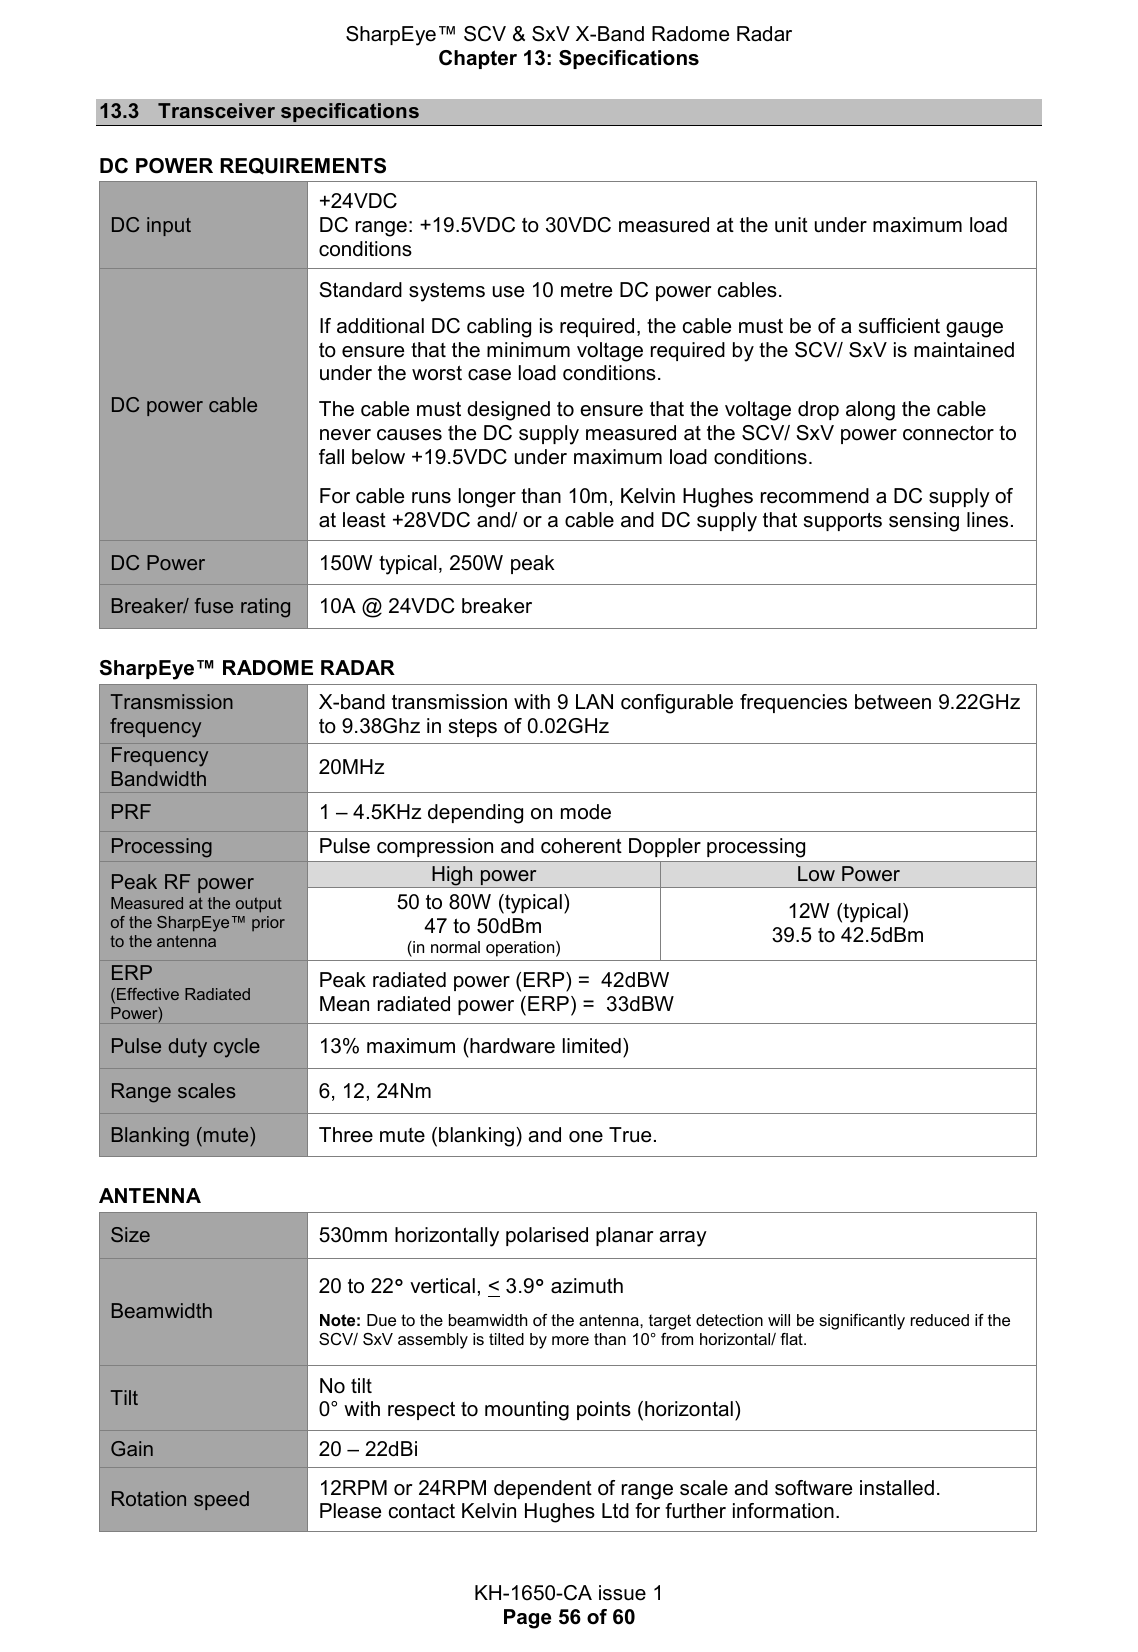 SharpEye™ SCV &amp; SxV X-Band Radome Radar Chapter 13: Specifications  KH-1650-CA issue 1 Page 56 of 60 13.3  Transceiver specifications  DC POWER REQUIREMENTS DC input +24VDC  DC range: +19.5VDC to 30VDC measured at the unit under maximum load conditions DC power cable Standard systems use 10 metre DC power cables.   If additional DC cabling is required, the cable must be of a sufficient gauge to ensure that the minimum voltage required by the SCV/ SxV is maintained under the worst case load conditions.   The cable must designed to ensure that the voltage drop along the cable never causes the DC supply measured at the SCV/ SxV power connector to fall below +19.5VDC under maximum load conditions.  For cable runs longer than 10m, Kelvin Hughes recommend a DC supply of at least +28VDC and/ or a cable and DC supply that supports sensing lines. DC Power 150W typical, 250W peak Breaker/ fuse rating 10A @ 24VDC breaker   SharpEye™ RADOME RADAR Transmission frequency X-band transmission with 9 LAN configurable frequencies between 9.22GHz to 9.38Ghz in steps of 0.02GHz Frequency Bandwidth 20MHz PRF 1 – 4.5KHz depending on mode Processing Pulse compression and coherent Doppler processing Peak RF power Measured at the output of the SharpEye™ prior to the antenna High power Low Power 50 to 80W (typical) 47 to 50dBm (in normal operation) 12W (typical) 39.5 to 42.5dBm ERP (Effective Radiated Power) Peak radiated power (ERP) =  42dBW Mean radiated power (ERP) =  33dBW Pulse duty cycle 13% maximum (hardware limited) Range scales 6, 12, 24Nm Blanking (mute) Three mute (blanking) and one True.   ANTENNA Size 530mm horizontally polarised planar array Beamwidth 20 to 22° vertical, &lt; 3.9° azimuth  Note: Due to the beamwidth of the antenna, target detection will be significantly reduced if the SCV/ SxV assembly is tilted by more than 10° from horizontal/ flat. Tilt No tilt 0° with respect to mounting points (horizontal) Gain 20 – 22dBi Rotation speed 12RPM or 24RPM dependent of range scale and software installed.  Please contact Kelvin Hughes Ltd for further information.    